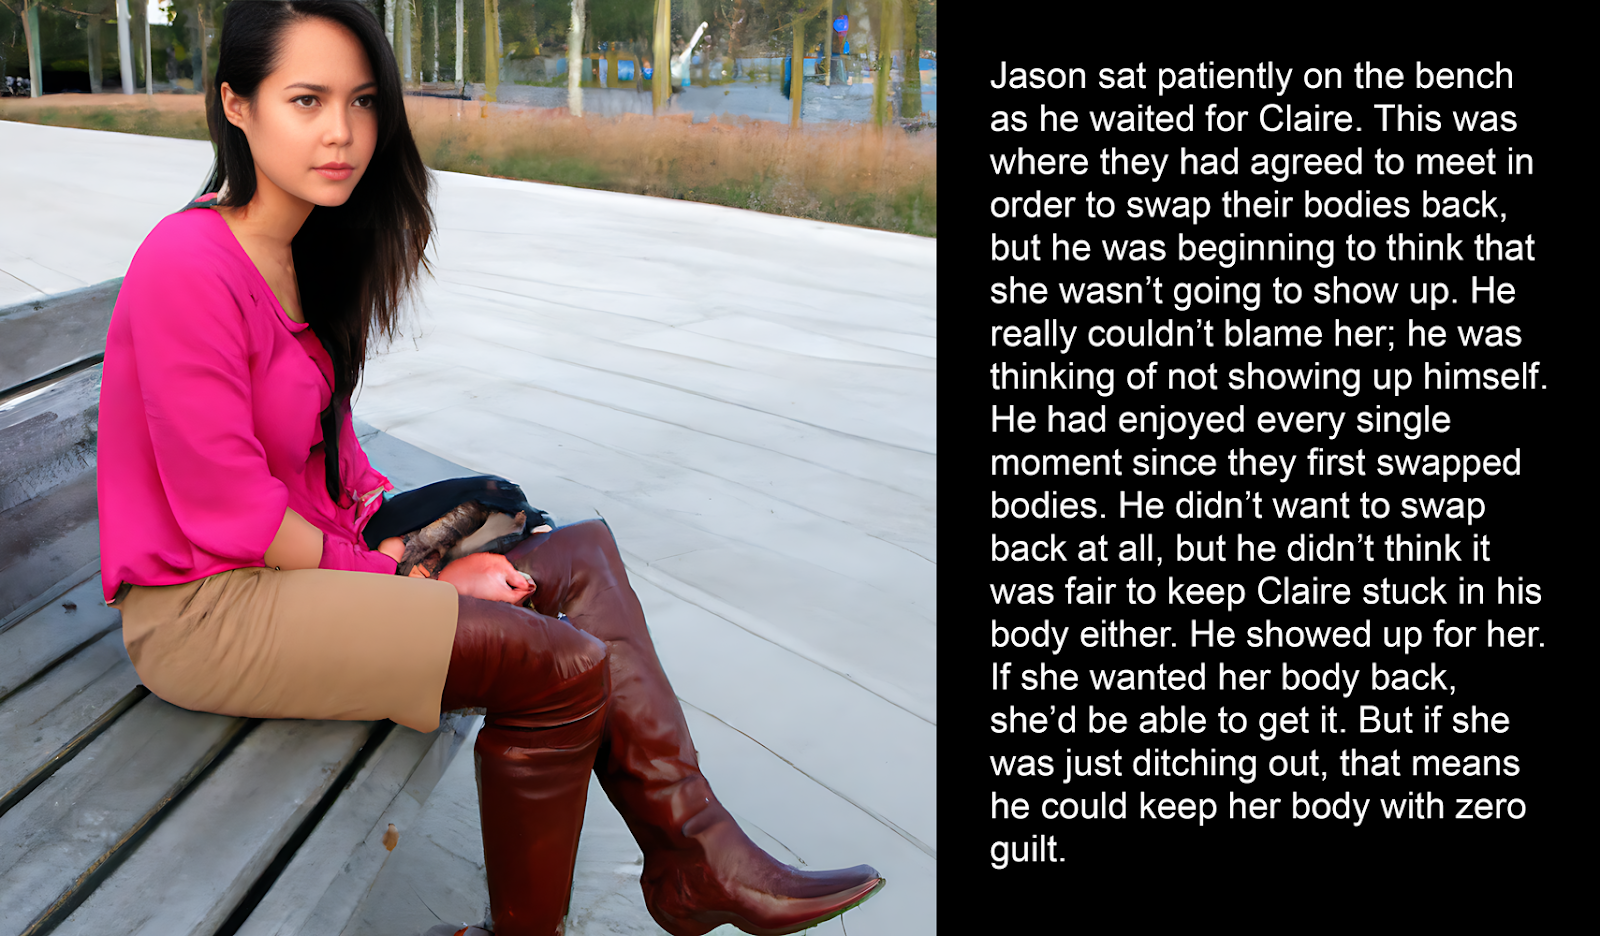 Jason sat patiently on the bench as he waited for Claire. This was where they had agreed to meet in order to swap their bodies back, but he was beginning to think that she wasn’t going to show up. He really couldn’t blame her; he was thinking of not showing up himself. He had enjoyed every single moment since they first swapped bodies. He didn’t want to swap back at all, but he didn’t think it was fair to keep Claire stuck in his body either. He showed up for her. If she wanted her body back, she’d be able to get it. But if she was just ditching out, that means he could keep her body with zero guilt.